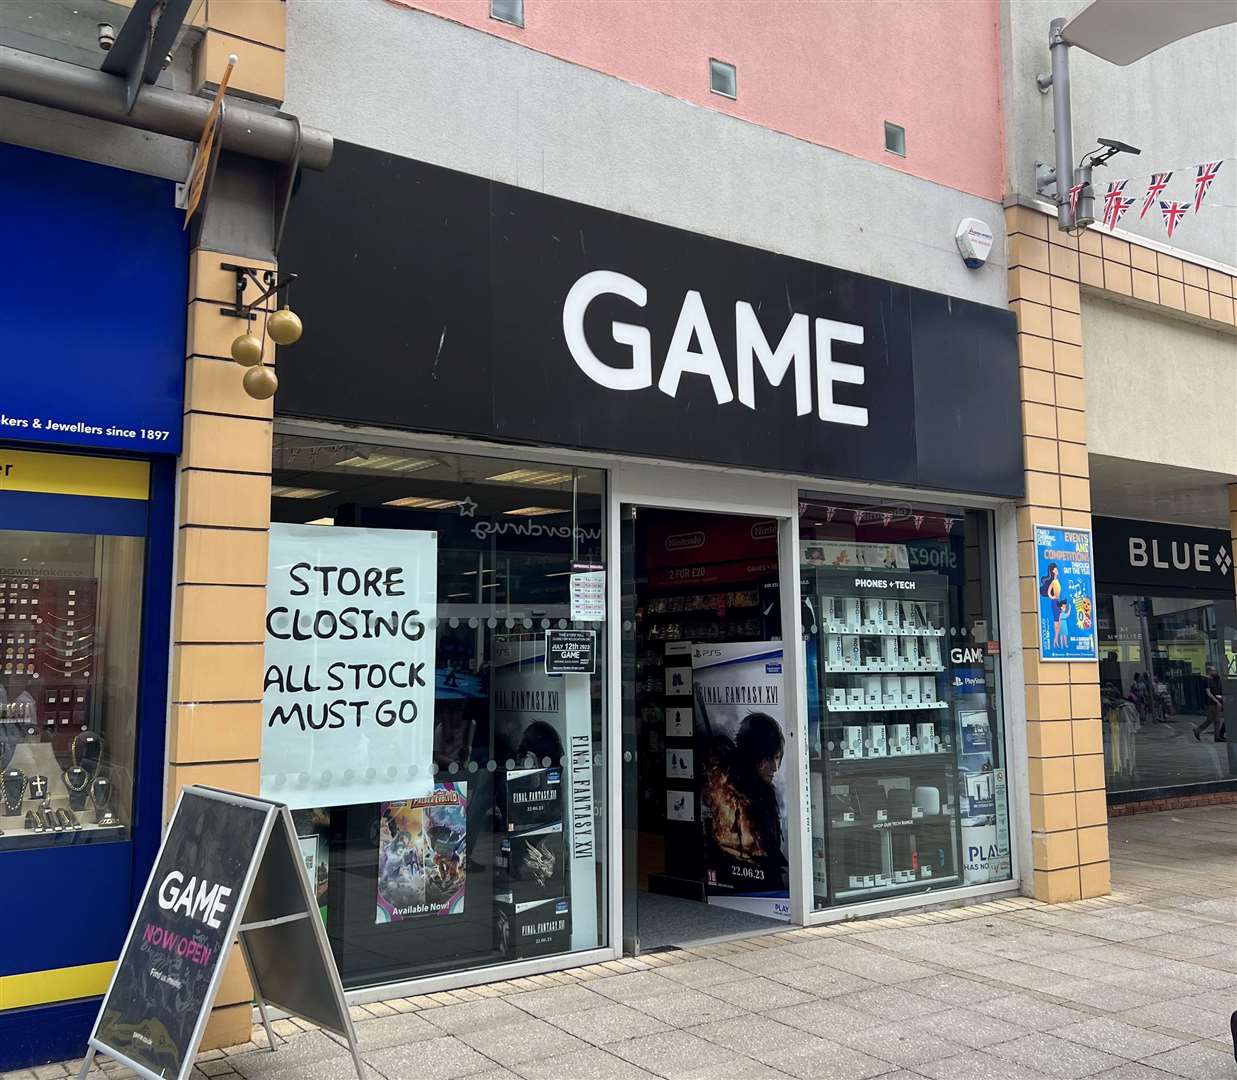 The Game store on Broad Street in King's Lynn